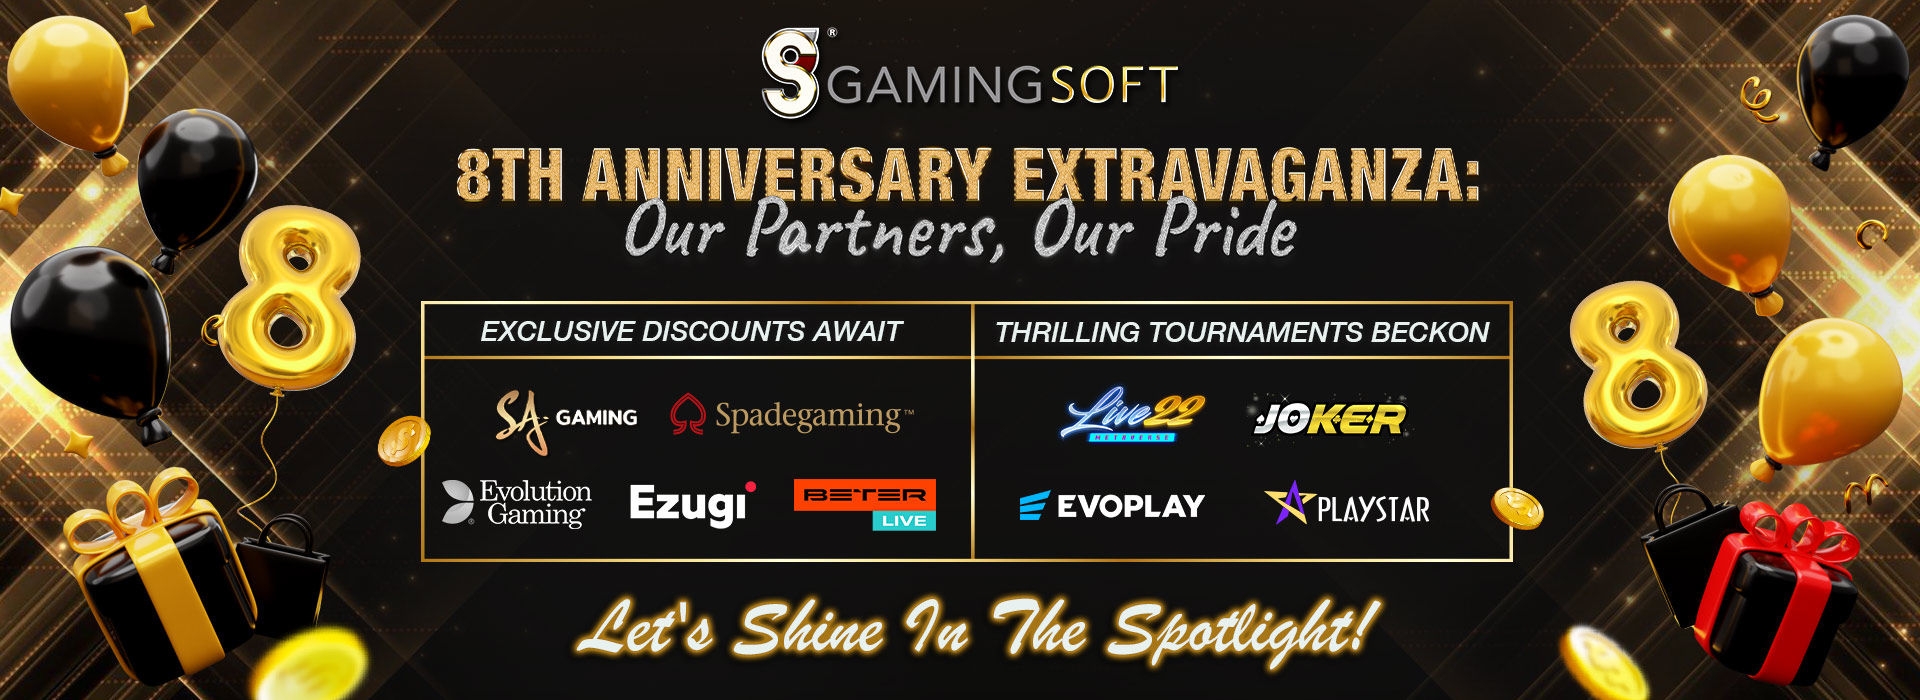 8th Anniversary Extravaganza - Out Partners, Our Pride